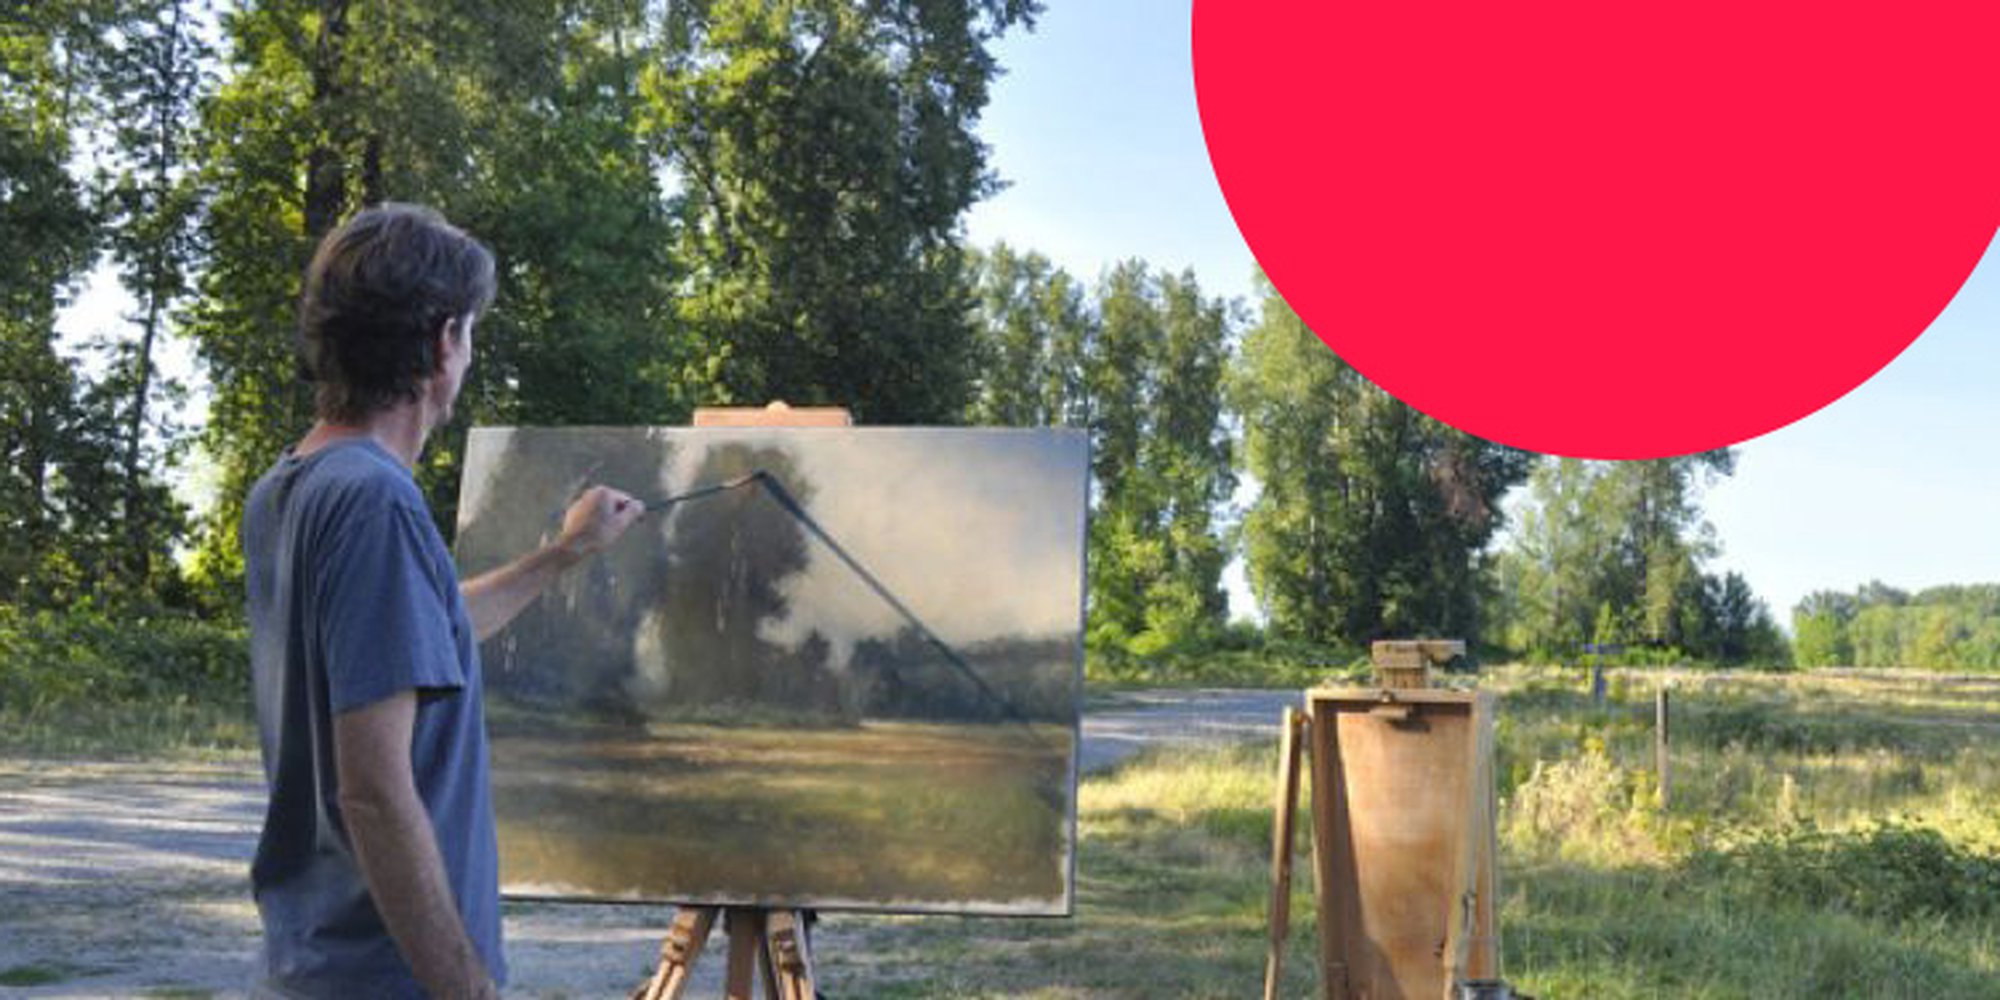 Portland artist Don Bishop on painting plein air, romanticism and using Artfinder to connect with art lovers across the world.